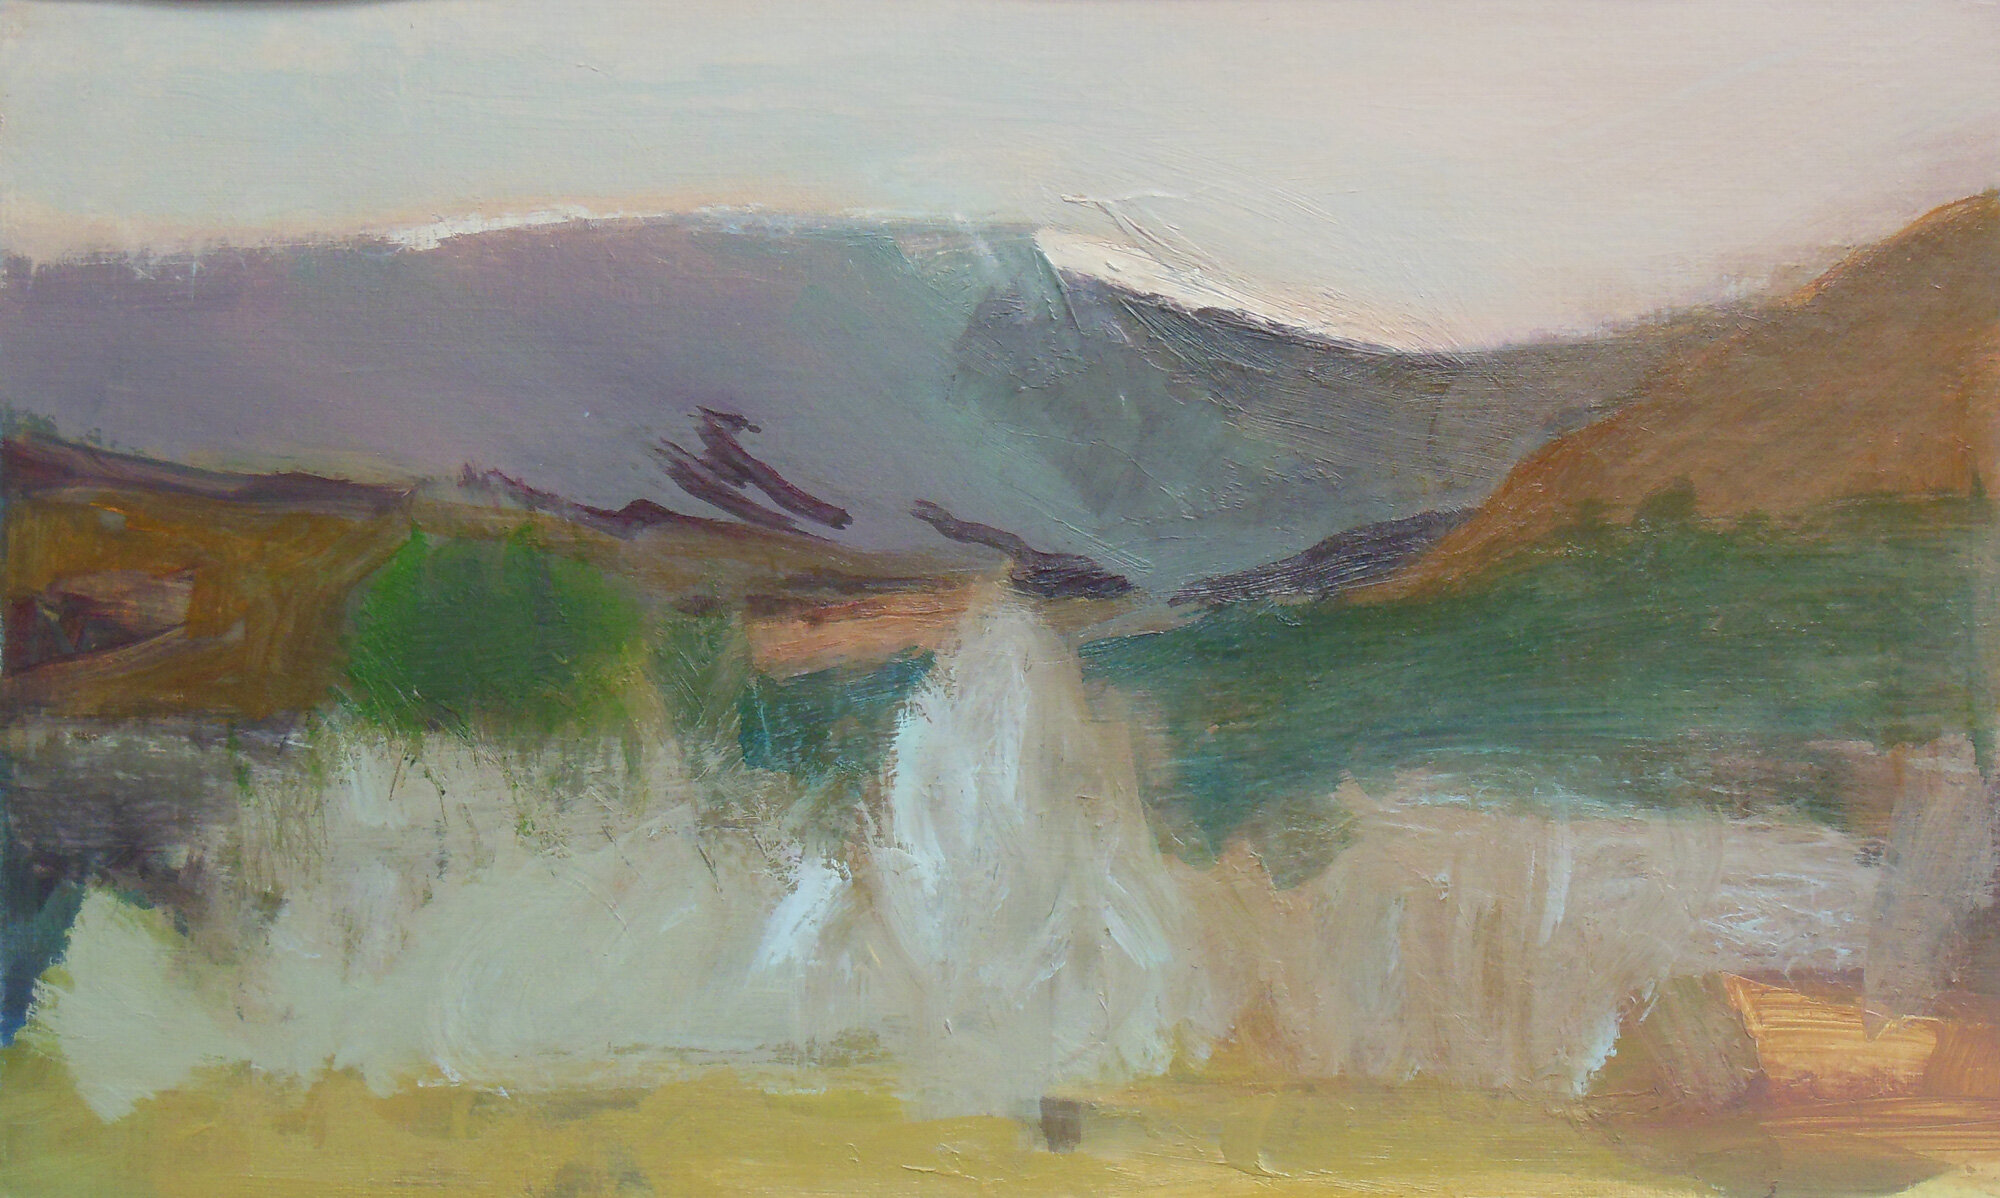 Low Light, Approach to Cairngorm